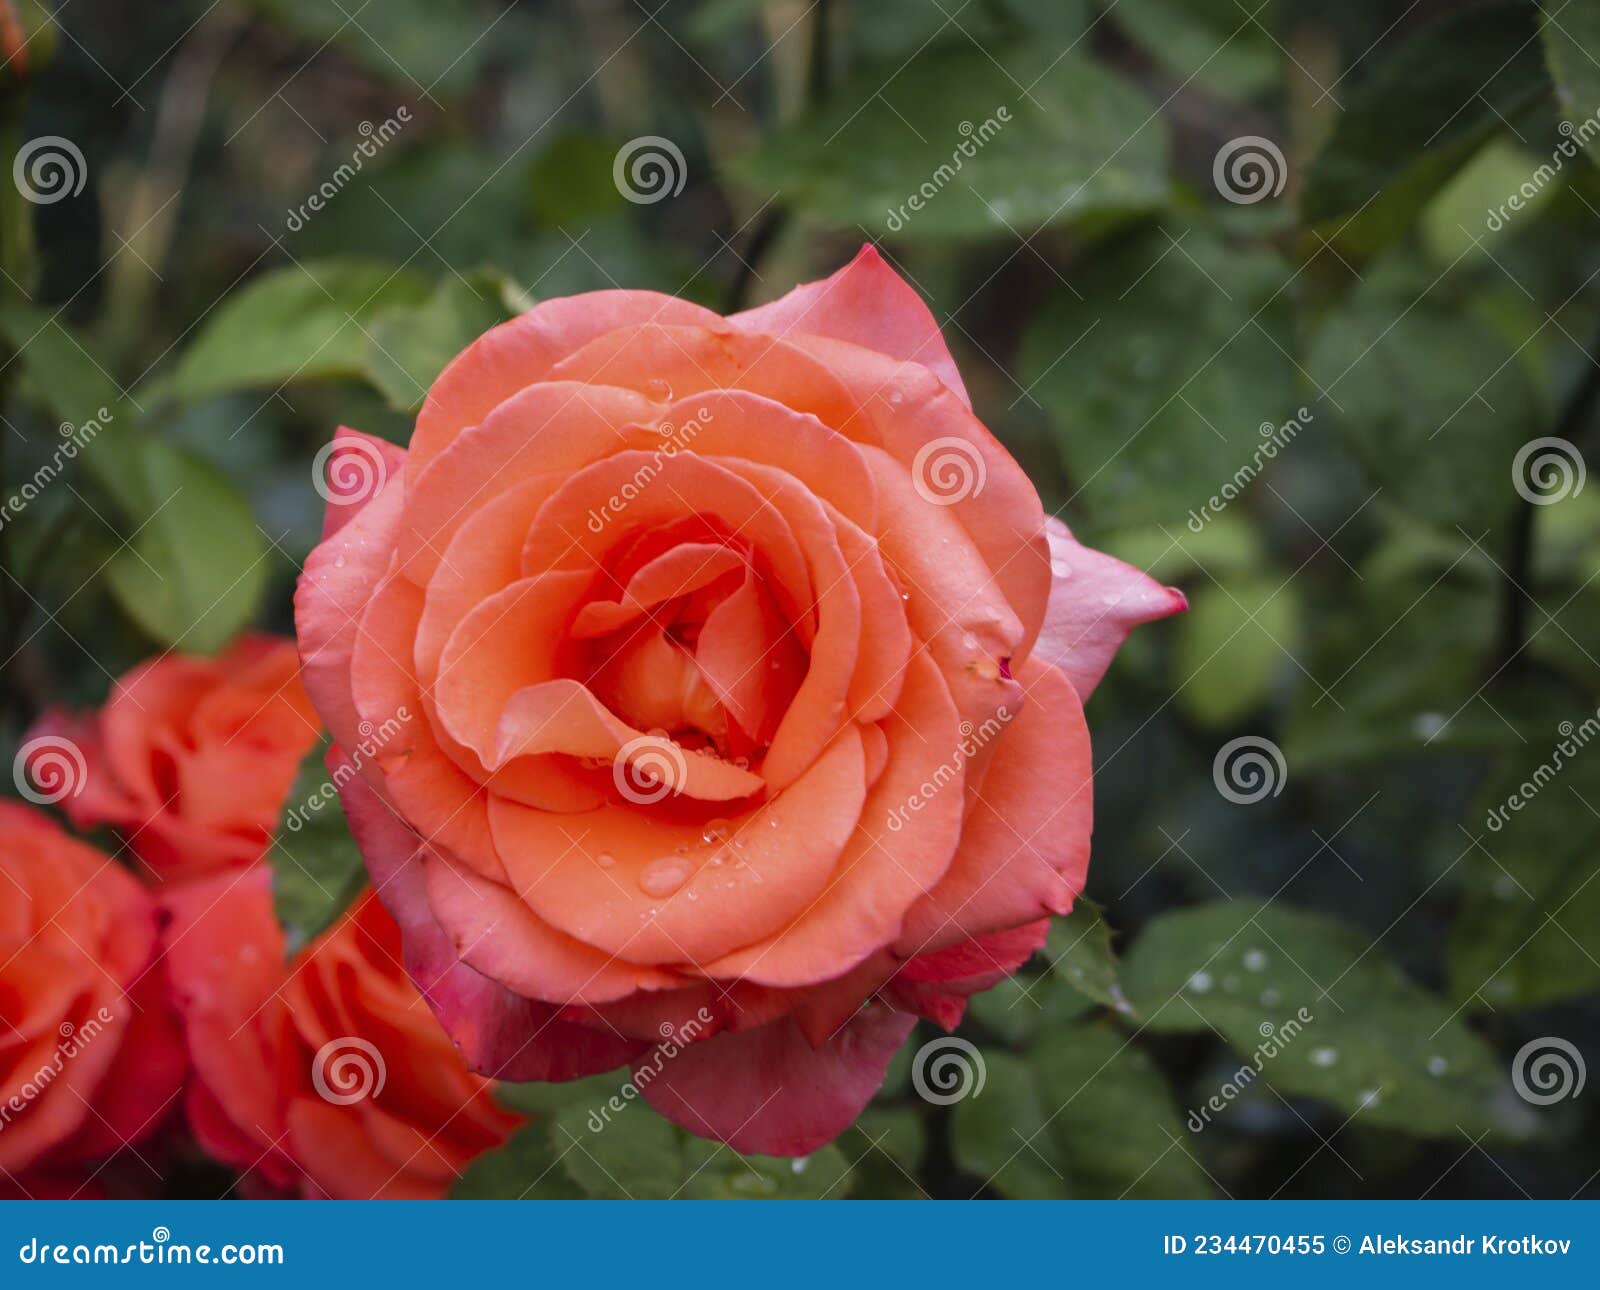 Close-up of a Red Rose with Raindrops Blooming Outdoors Top View ...